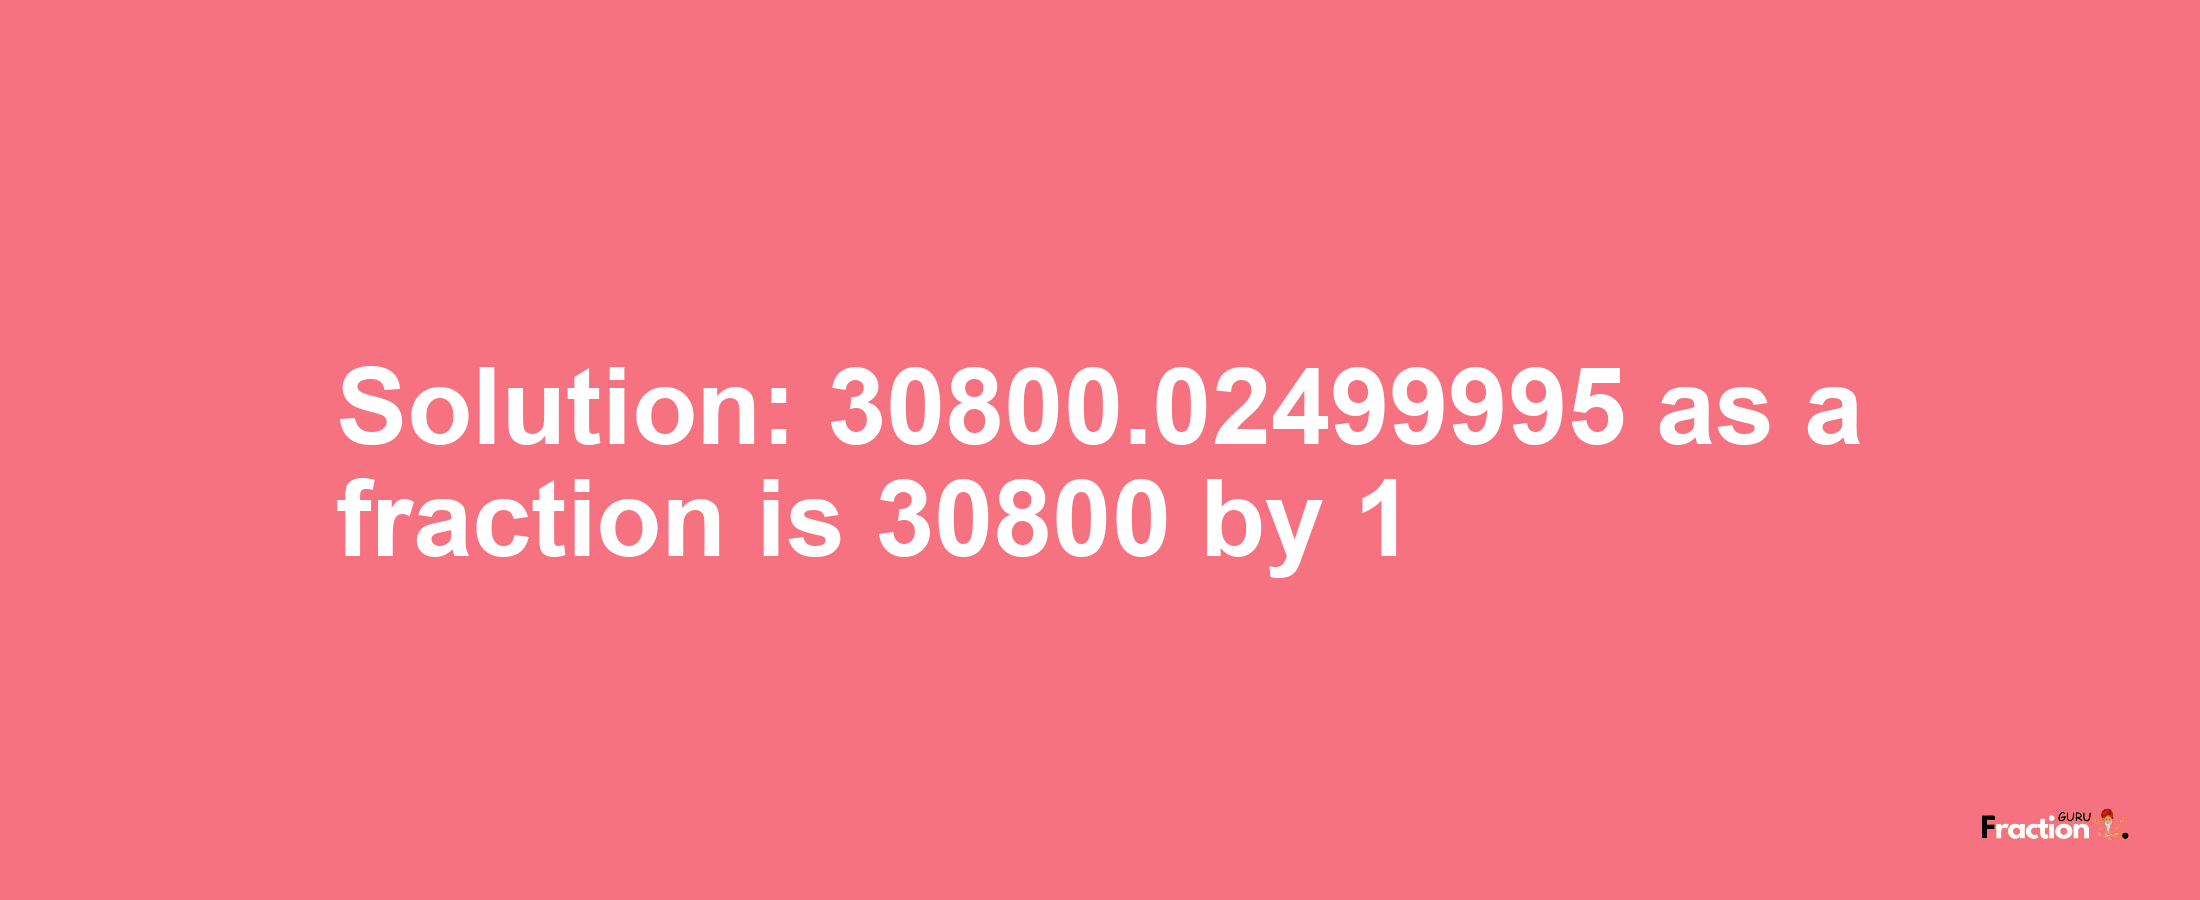 Solution:30800.02499995 as a fraction is 30800/1